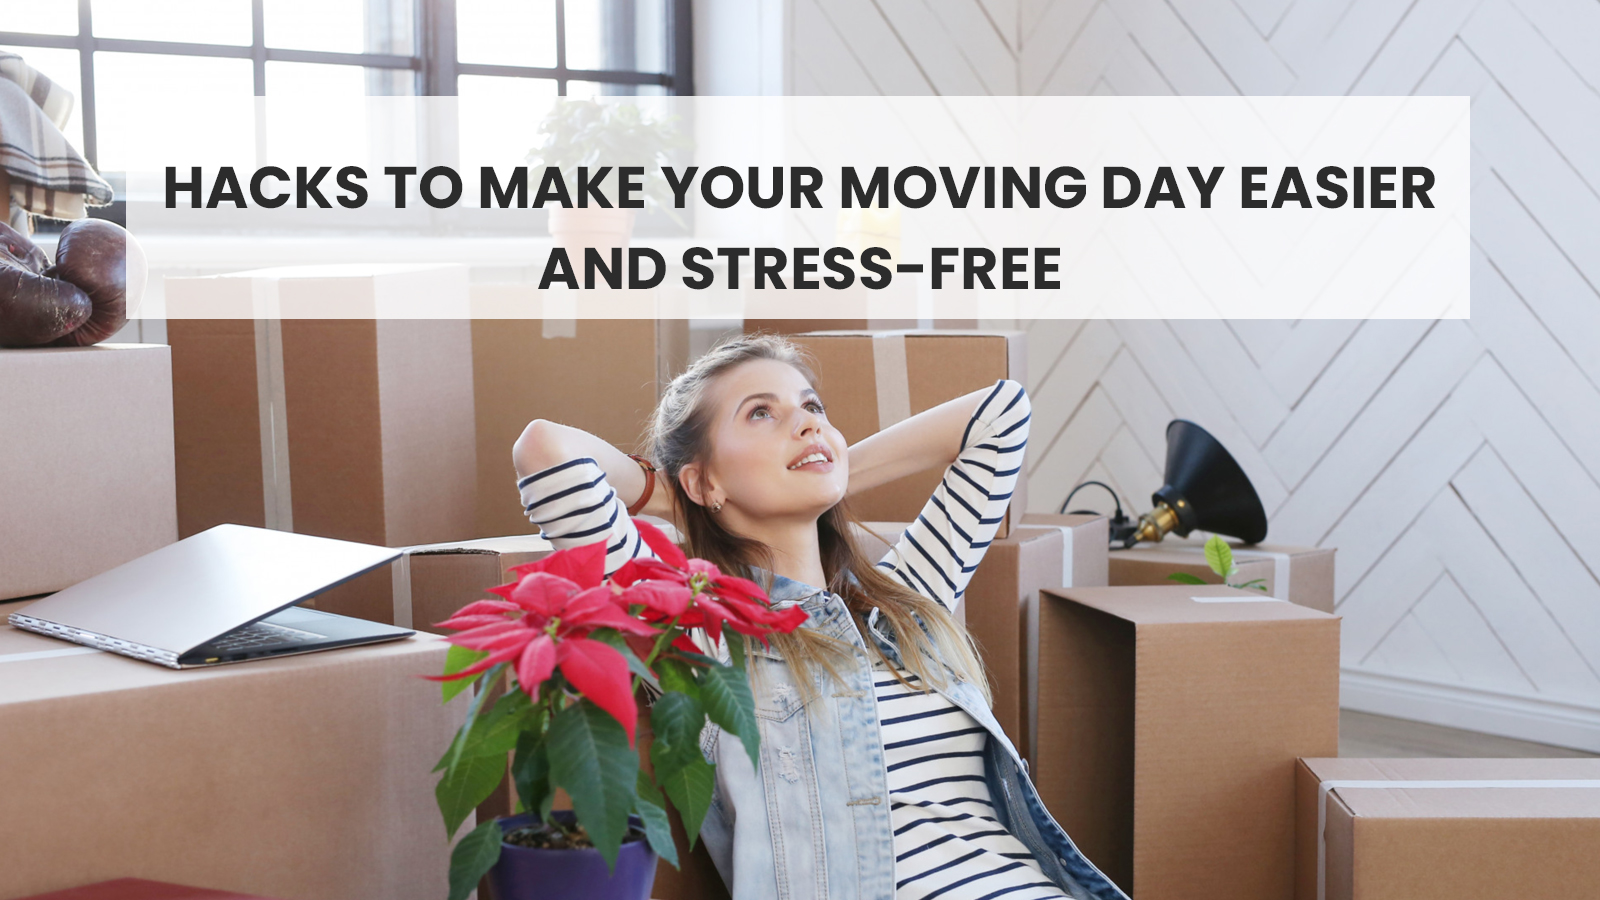 Hacks To Make Your Moving Day Easier and Stress Free